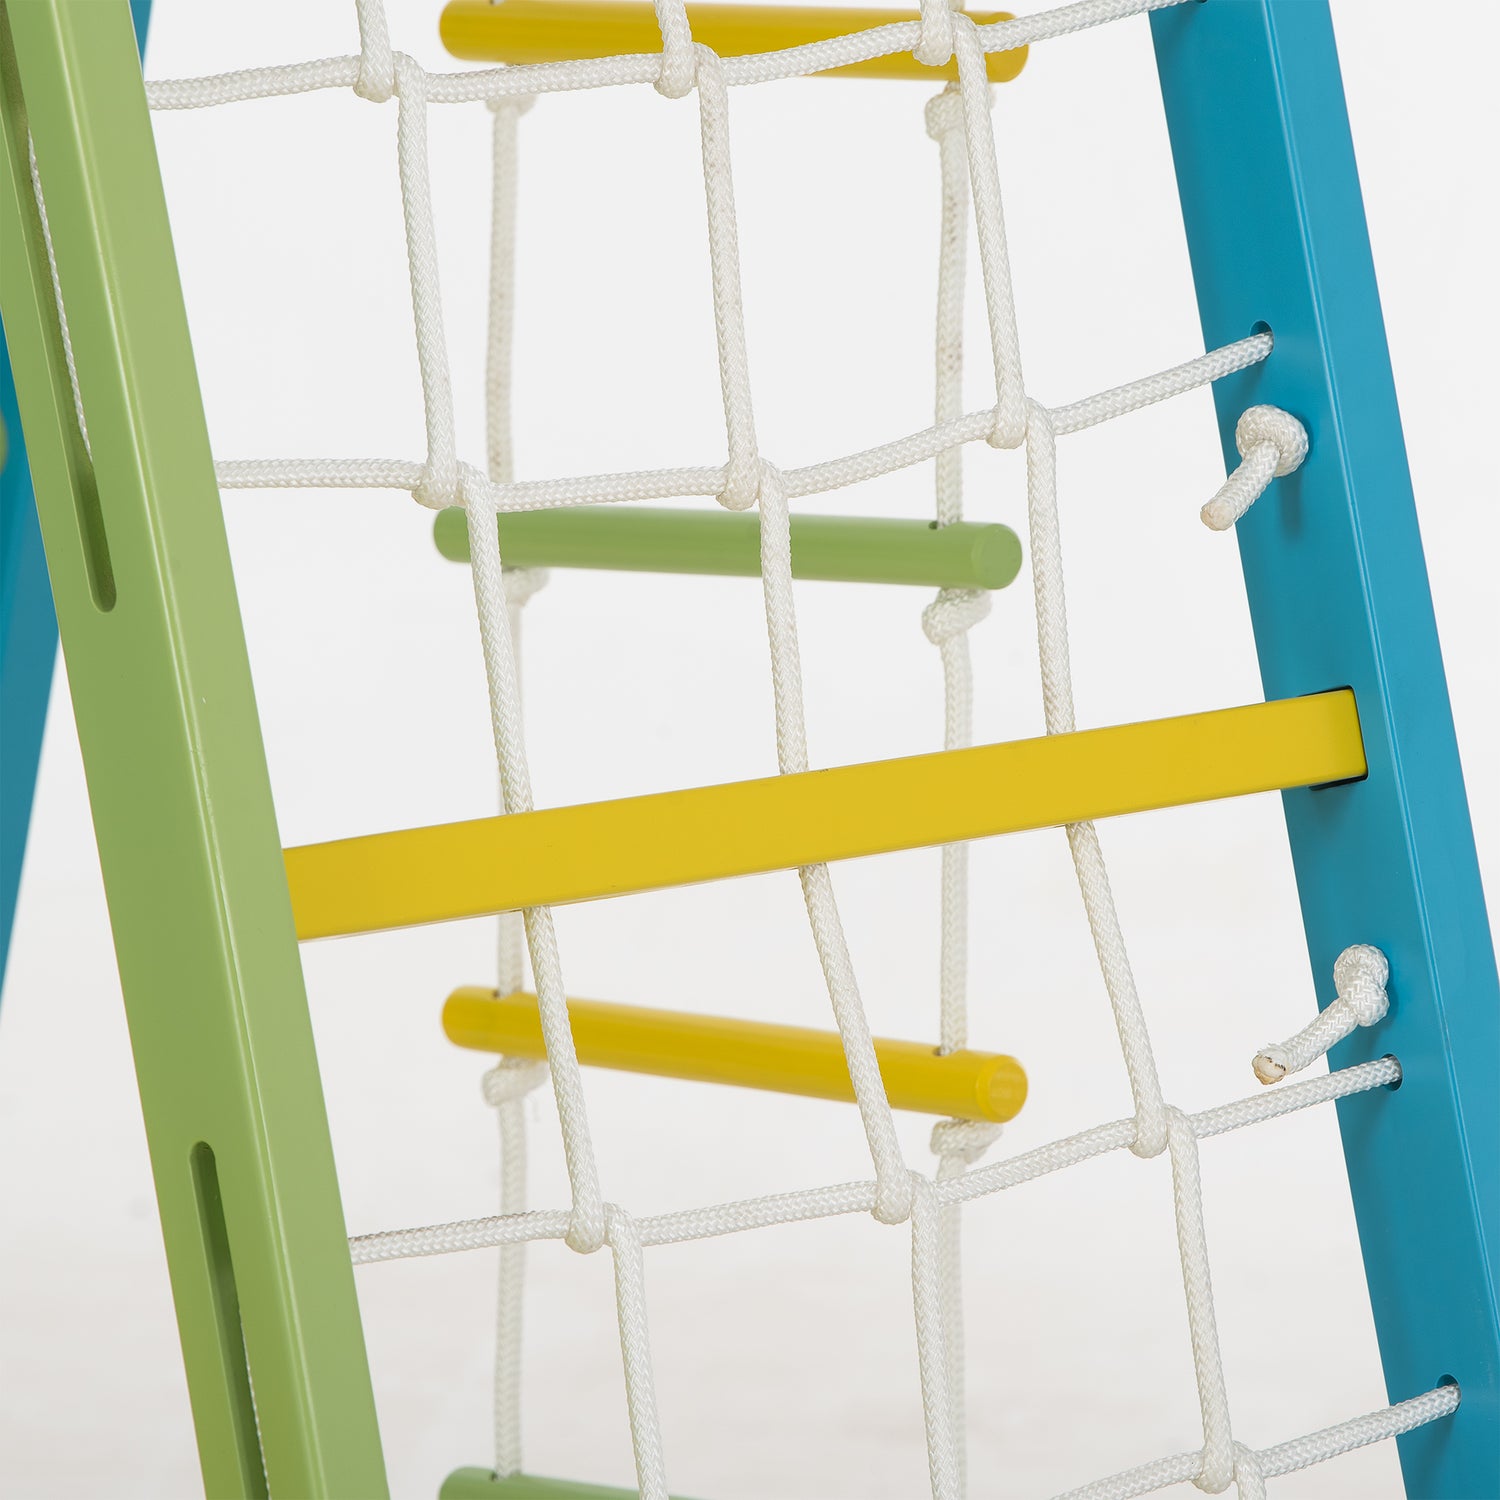 Rope Ladder Details of Avenlur's Magnolia Full Color Real Wood Playset